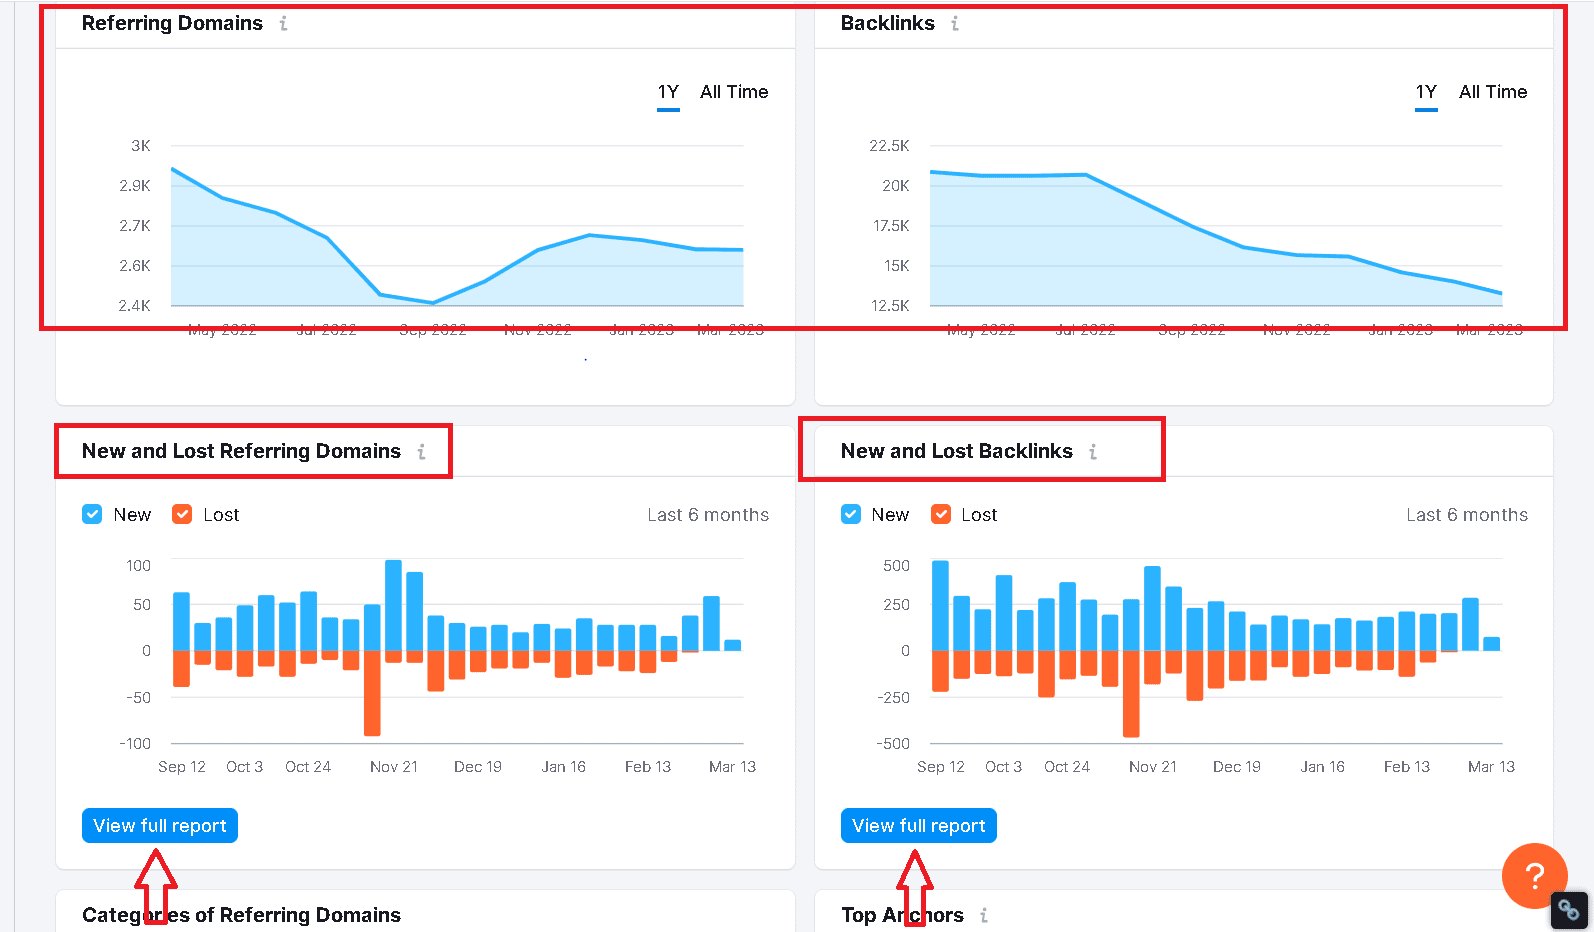 SEMrush link building trends graph and new/lost links and referring domains report